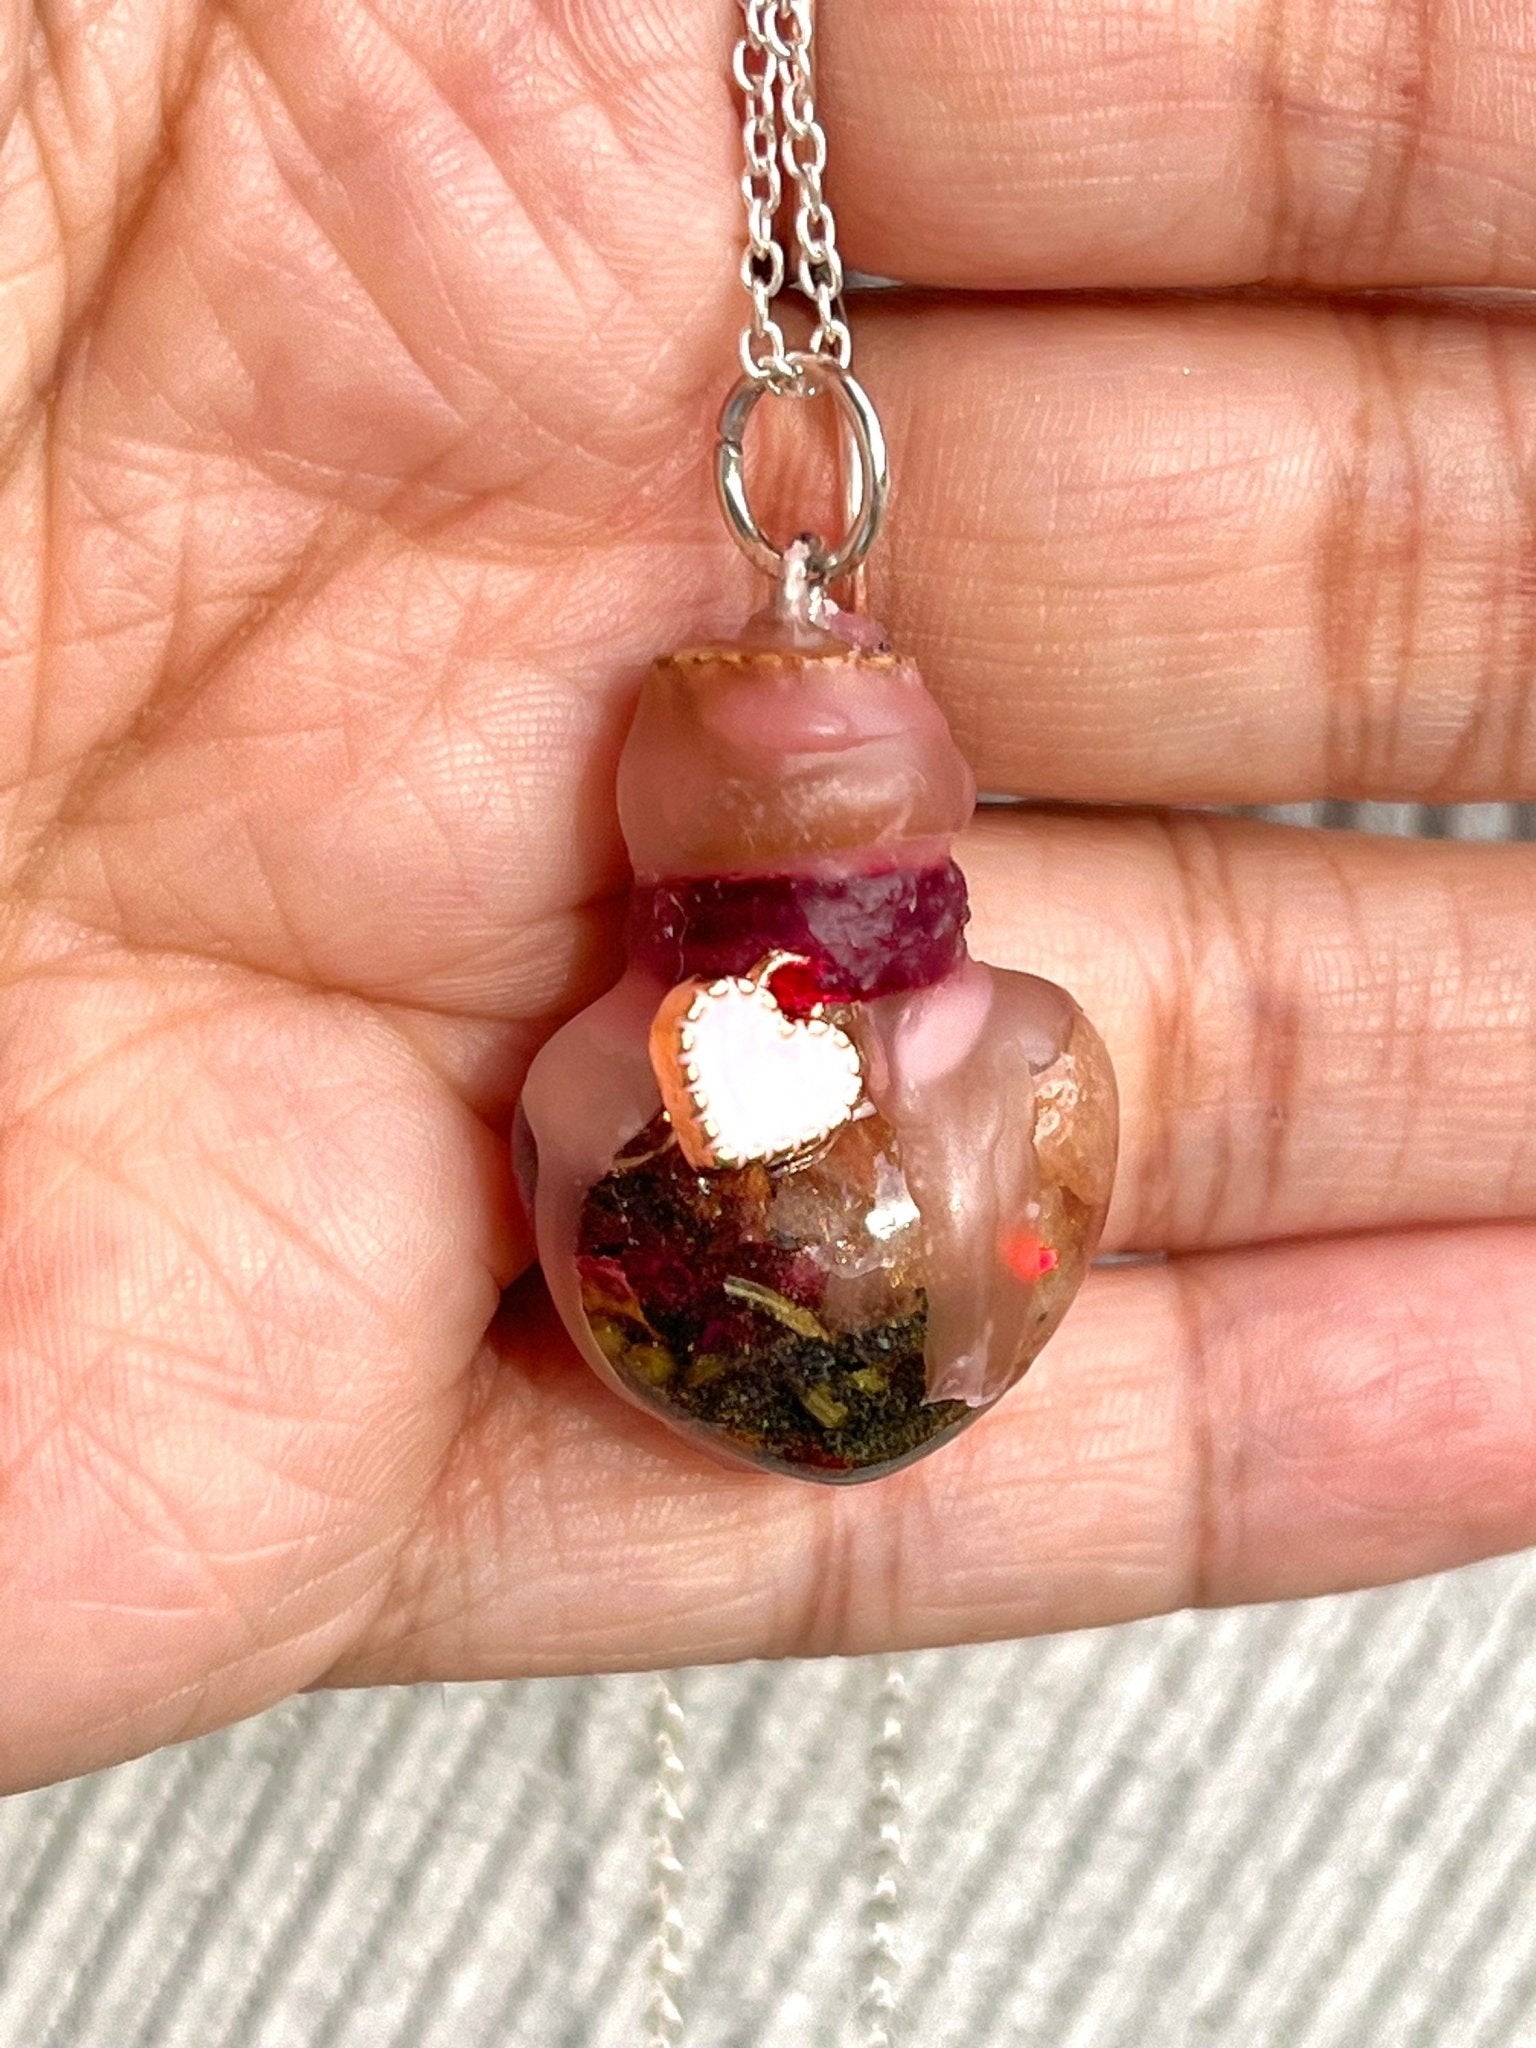 LOVE Spell Jar Necklace Keychain Earrings - Intention Spiritual Jewelry - Reconciliation - Positive Love Energy - MysticBluuMoonTarot